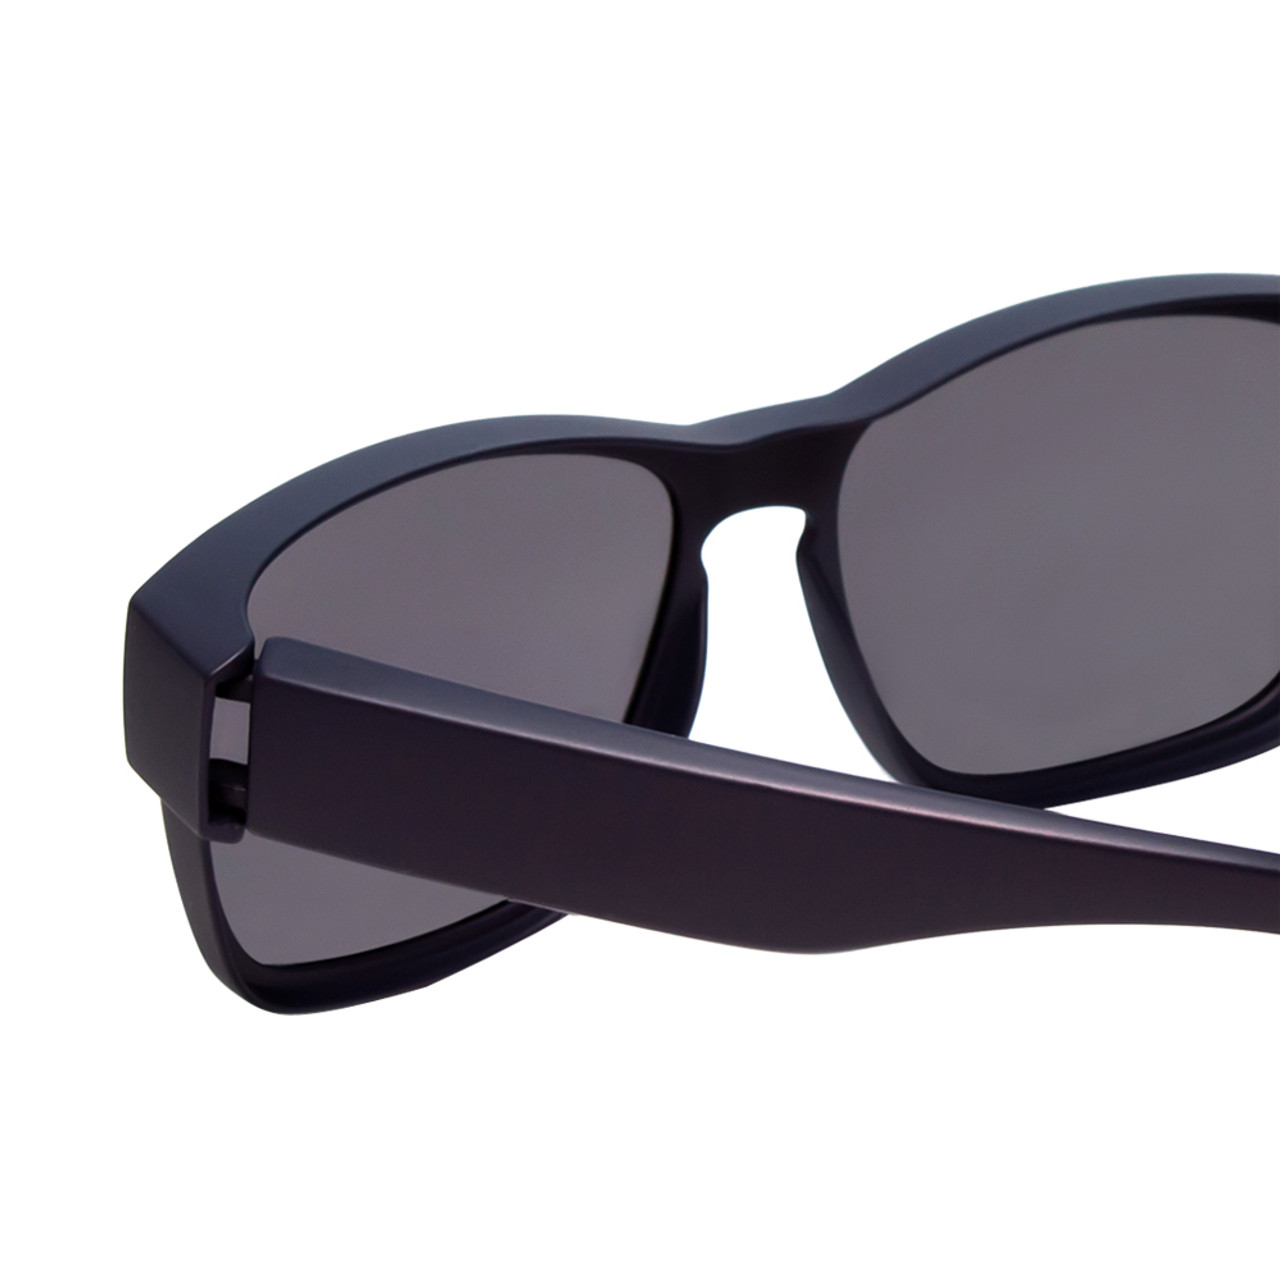 Close Up View of Calabria 9018 Small Polarized Fitover Sunglasses in Matte Navy Blue & Smoke Grey